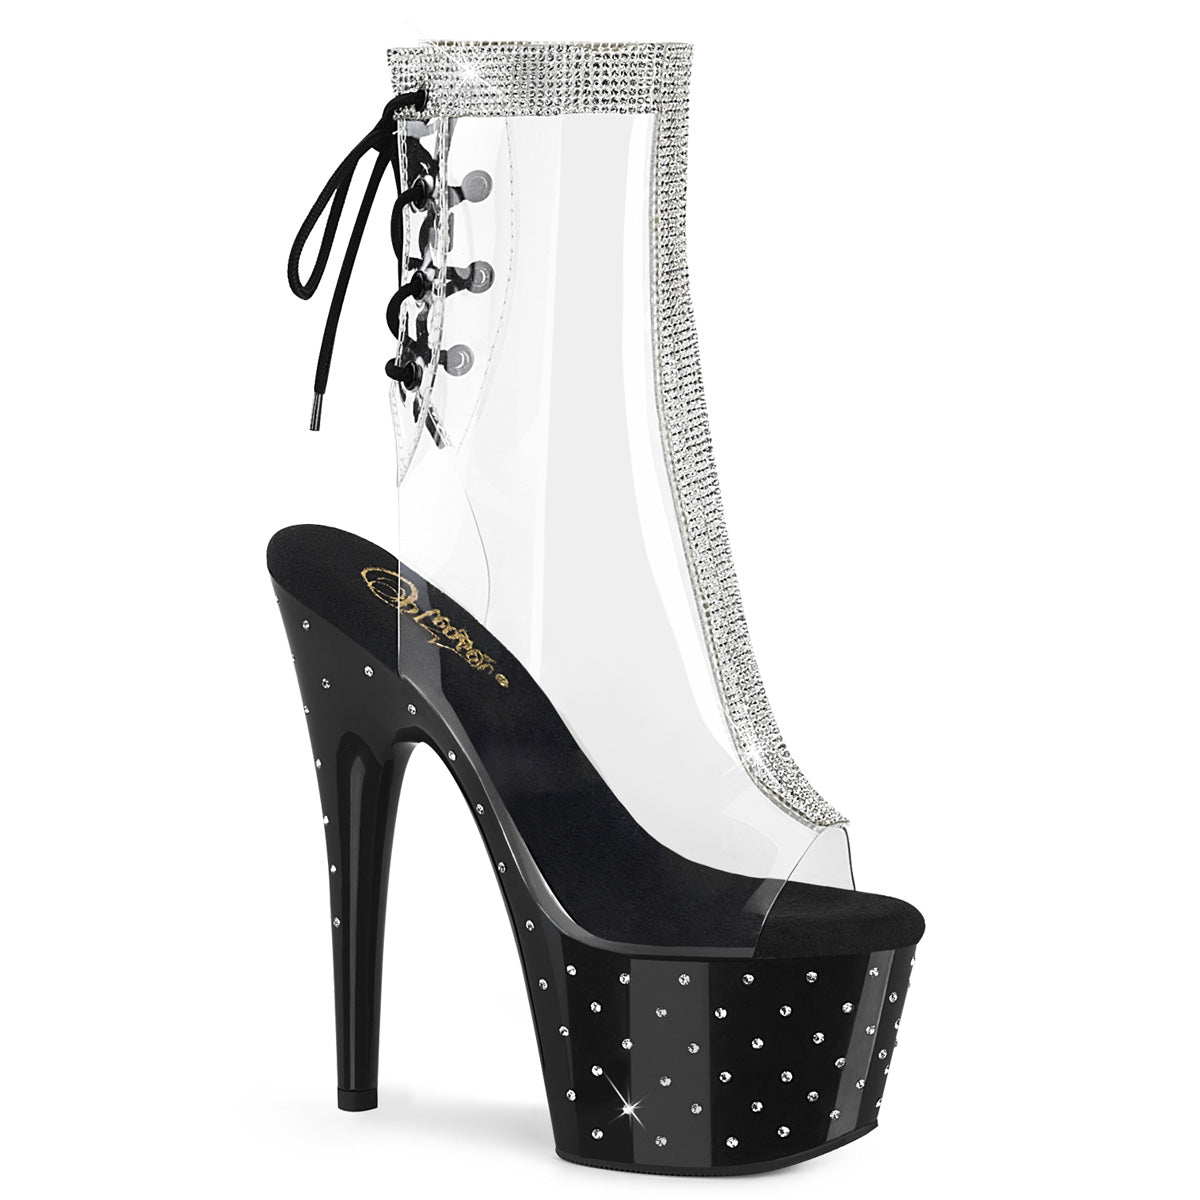 Pleaser STARDUST-1018C-2RS Clear-Black 7 Inch Heel, 2 3/4 Inch Platform Open Toe/Heel Ankle Boot With Rhinestone